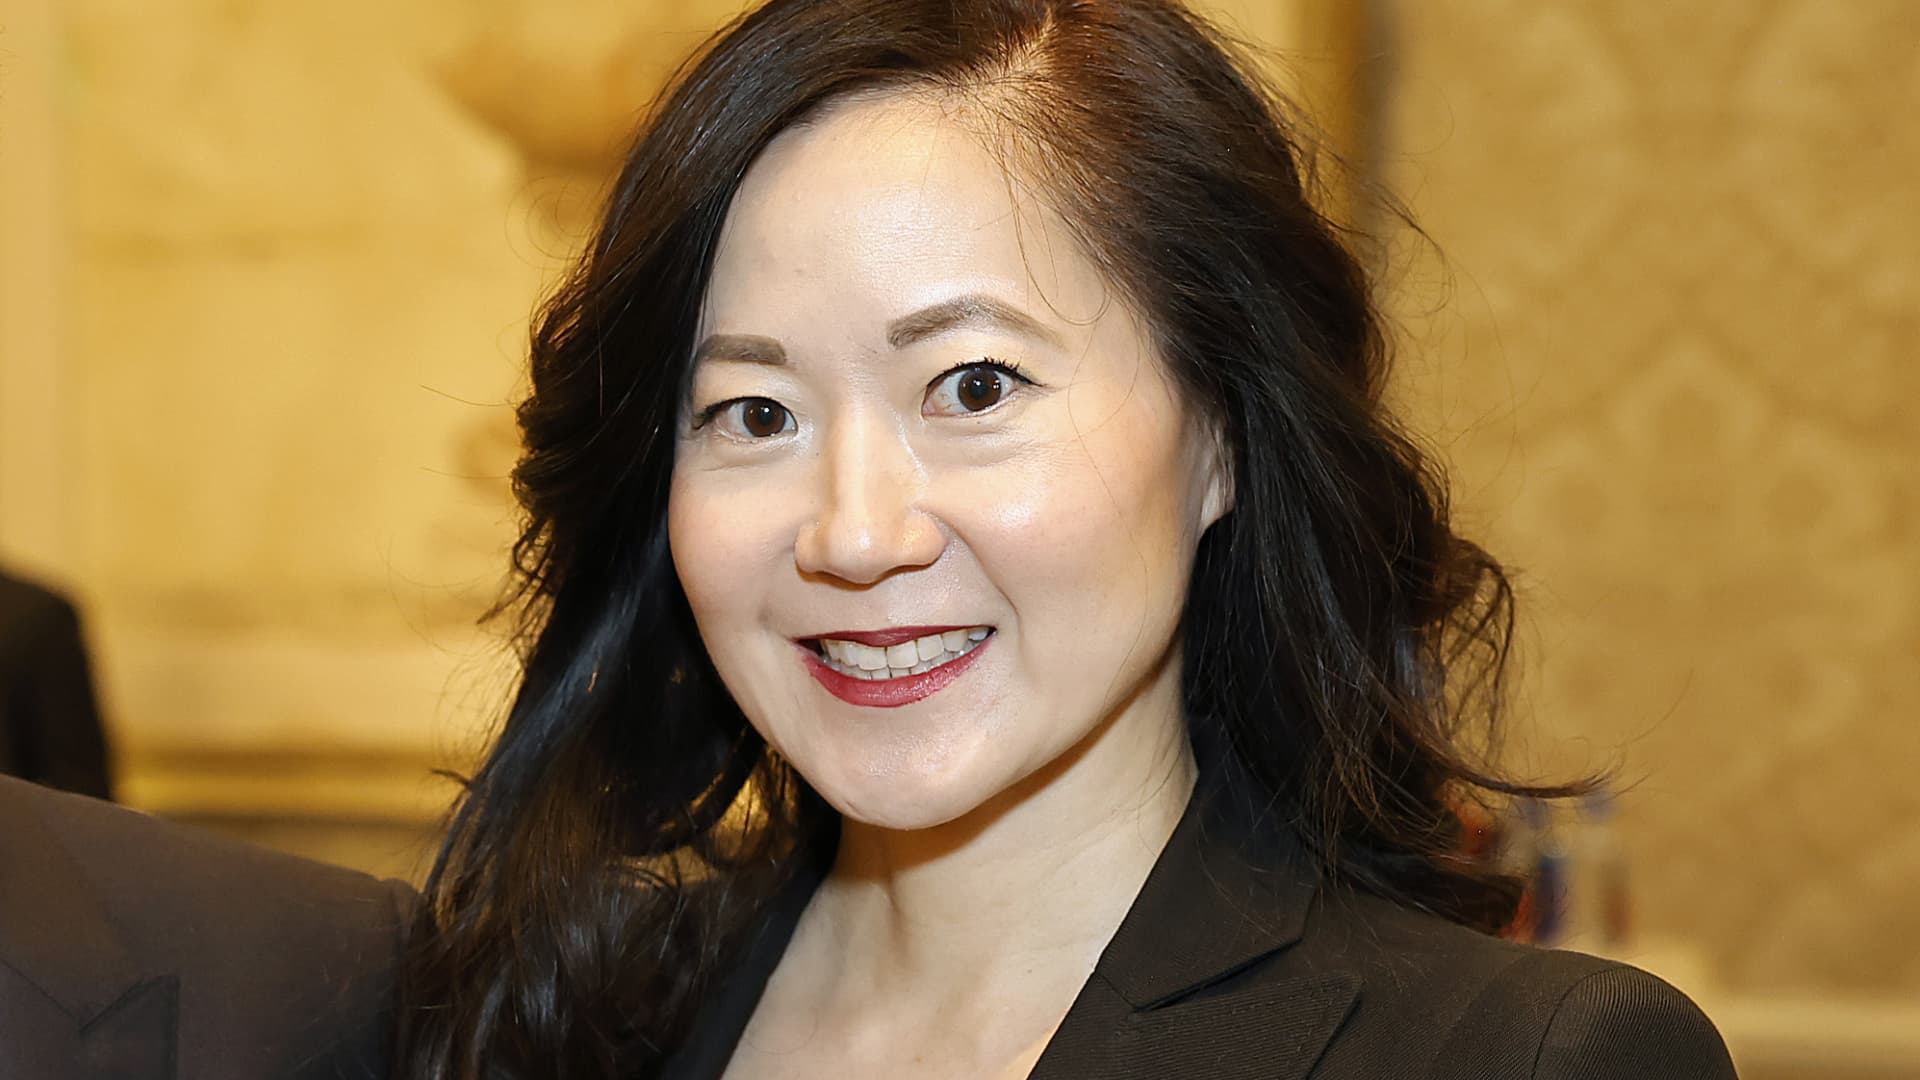 Foremost Group CEO Angela Chao intoxicated when Tesla went into Texas pond